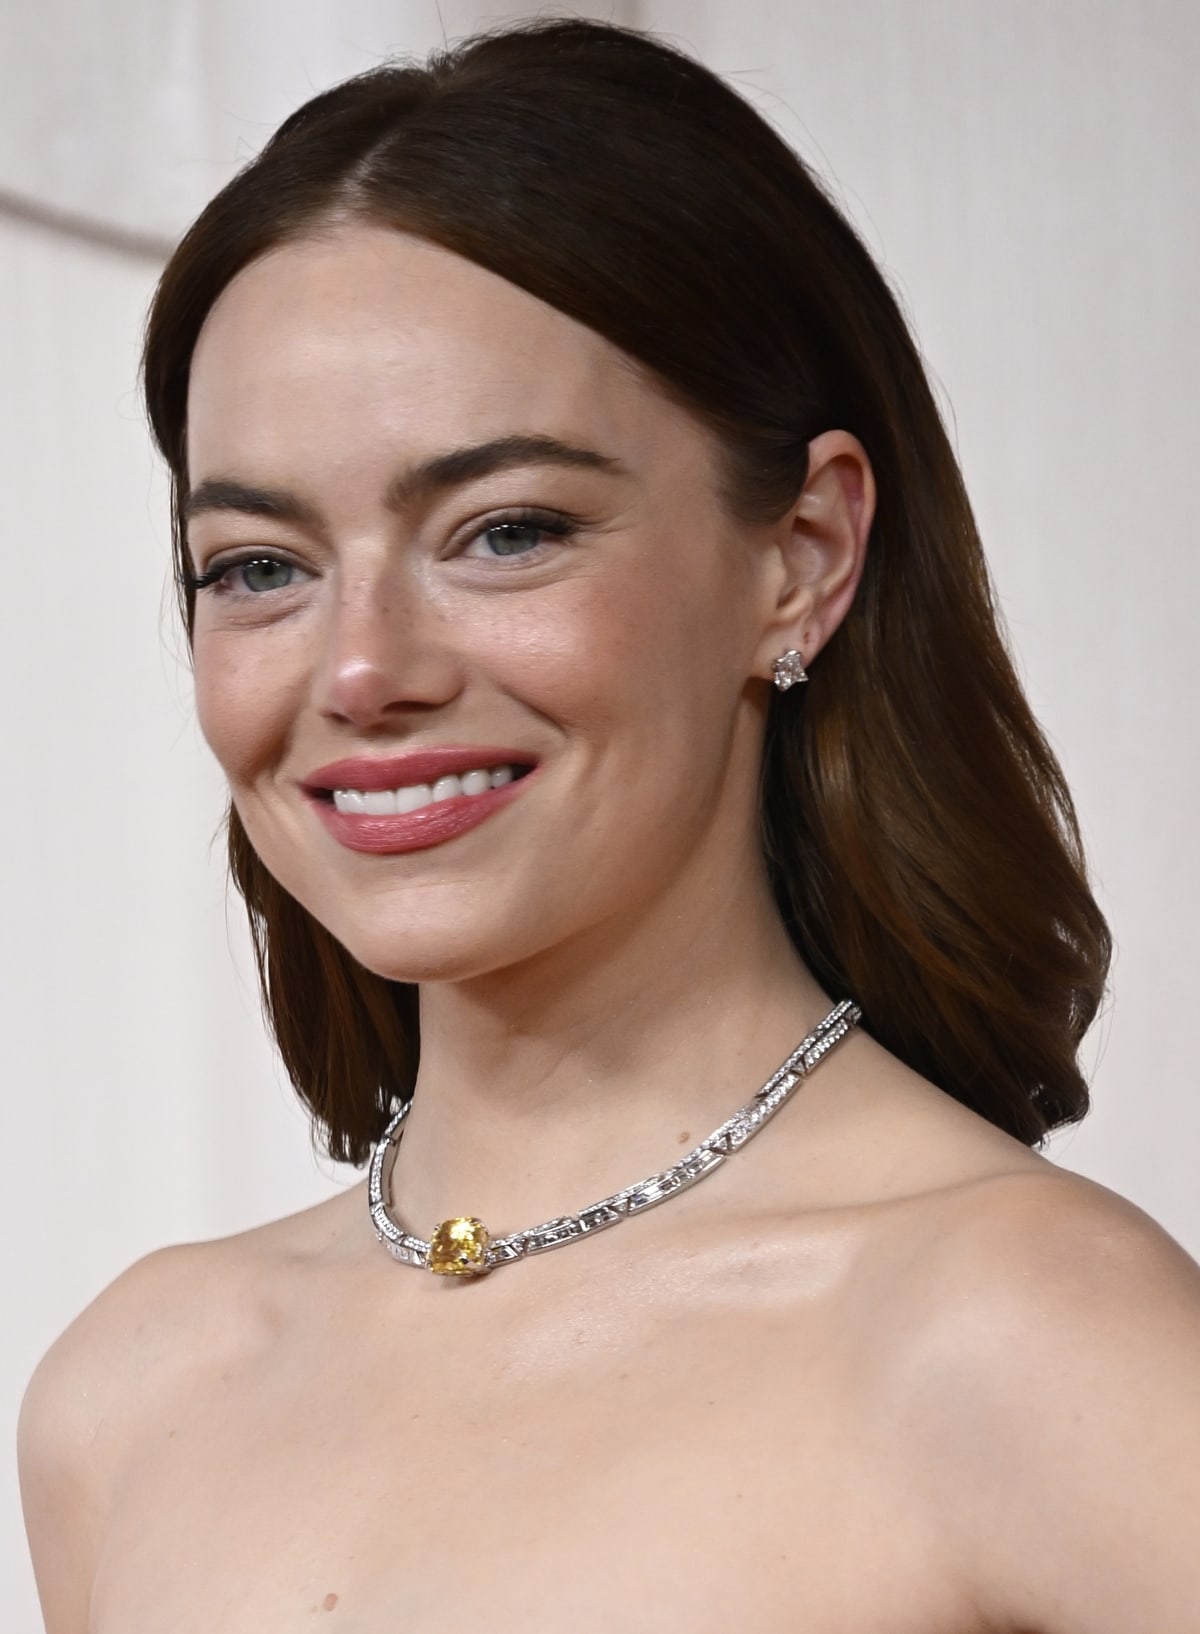 Emma Stone's elegant ensemble completed with a 30-karat white Louis Vuitton Deep Time choker necklace and natural, sophisticated makeup